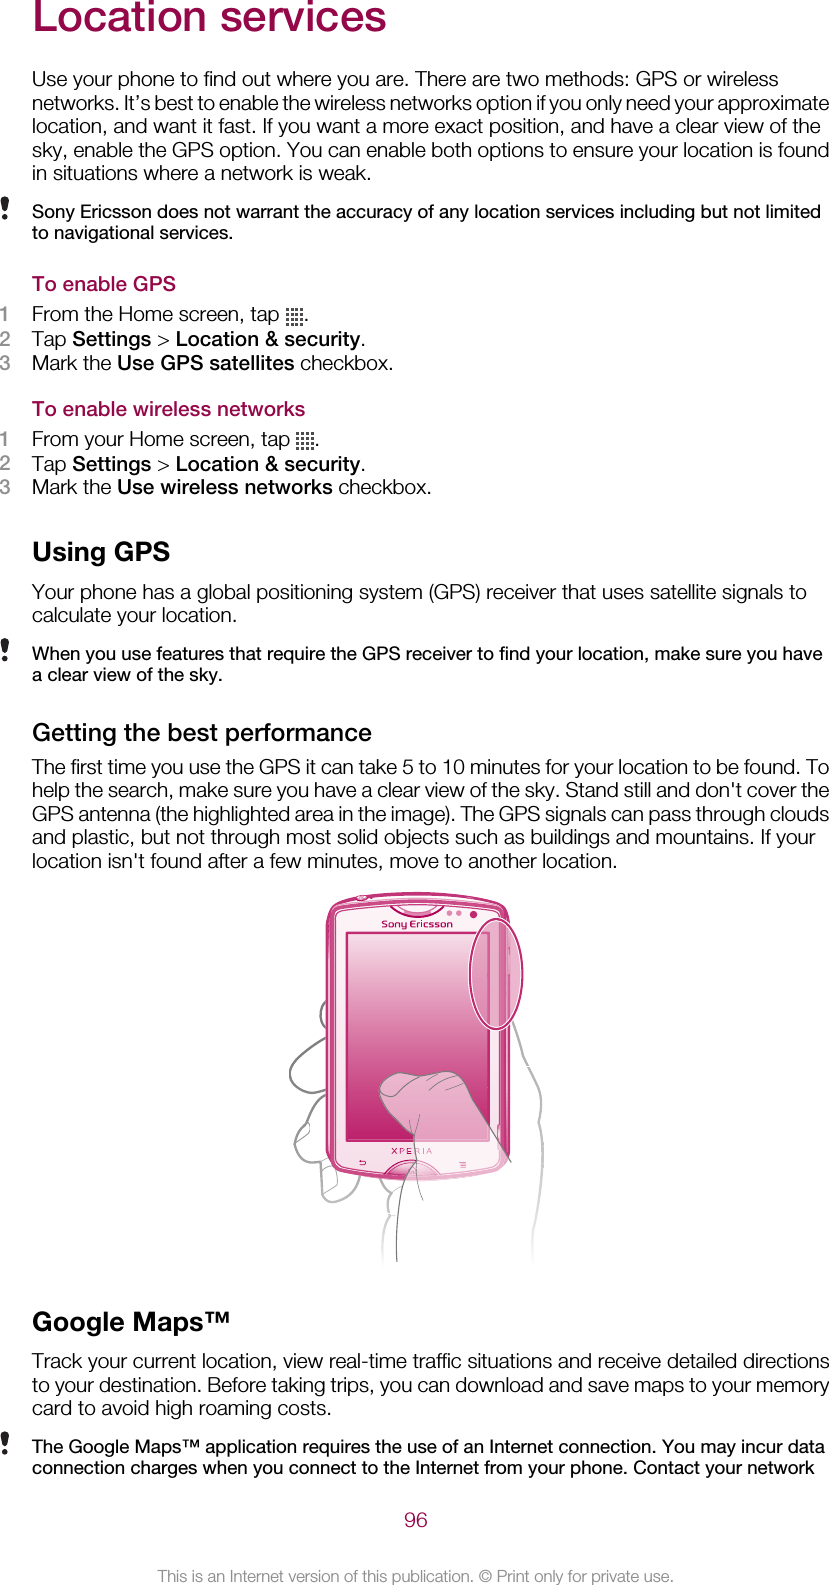 Location servicesUse your phone to find out where you are. There are two methods: GPS or wirelessnetworks. It’s best to enable the wireless networks option if you only need your approximatelocation, and want it fast. If you want a more exact position, and have a clear view of thesky, enable the GPS option. You can enable both options to ensure your location is foundin situations where a network is weak.Sony Ericsson does not warrant the accuracy of any location services including but not limitedto navigational services.To enable GPS1From the Home screen, tap  .2Tap Settings &gt; Location &amp; security.3Mark the Use GPS satellites checkbox.To enable wireless networks1From your Home screen, tap  .2Tap Settings &gt; Location &amp; security.3Mark the Use wireless networks checkbox.Using GPSYour phone has a global positioning system (GPS) receiver that uses satellite signals tocalculate your location.When you use features that require the GPS receiver to find your location, make sure you havea clear view of the sky.Getting the best performanceThe first time you use the GPS it can take 5 to 10 minutes for your location to be found. Tohelp the search, make sure you have a clear view of the sky. Stand still and don&apos;t cover theGPS antenna (the highlighted area in the image). The GPS signals can pass through cloudsand plastic, but not through most solid objects such as buildings and mountains. If yourlocation isn&apos;t found after a few minutes, move to another location.Google Maps™Track your current location, view real-time traffic situations and receive detailed directionsto your destination. Before taking trips, you can download and save maps to your memorycard to avoid high roaming costs.The Google Maps™ application requires the use of an Internet connection. You may incur dataconnection charges when you connect to the Internet from your phone. Contact your network96This is an Internet version of this publication. © Print only for private use.